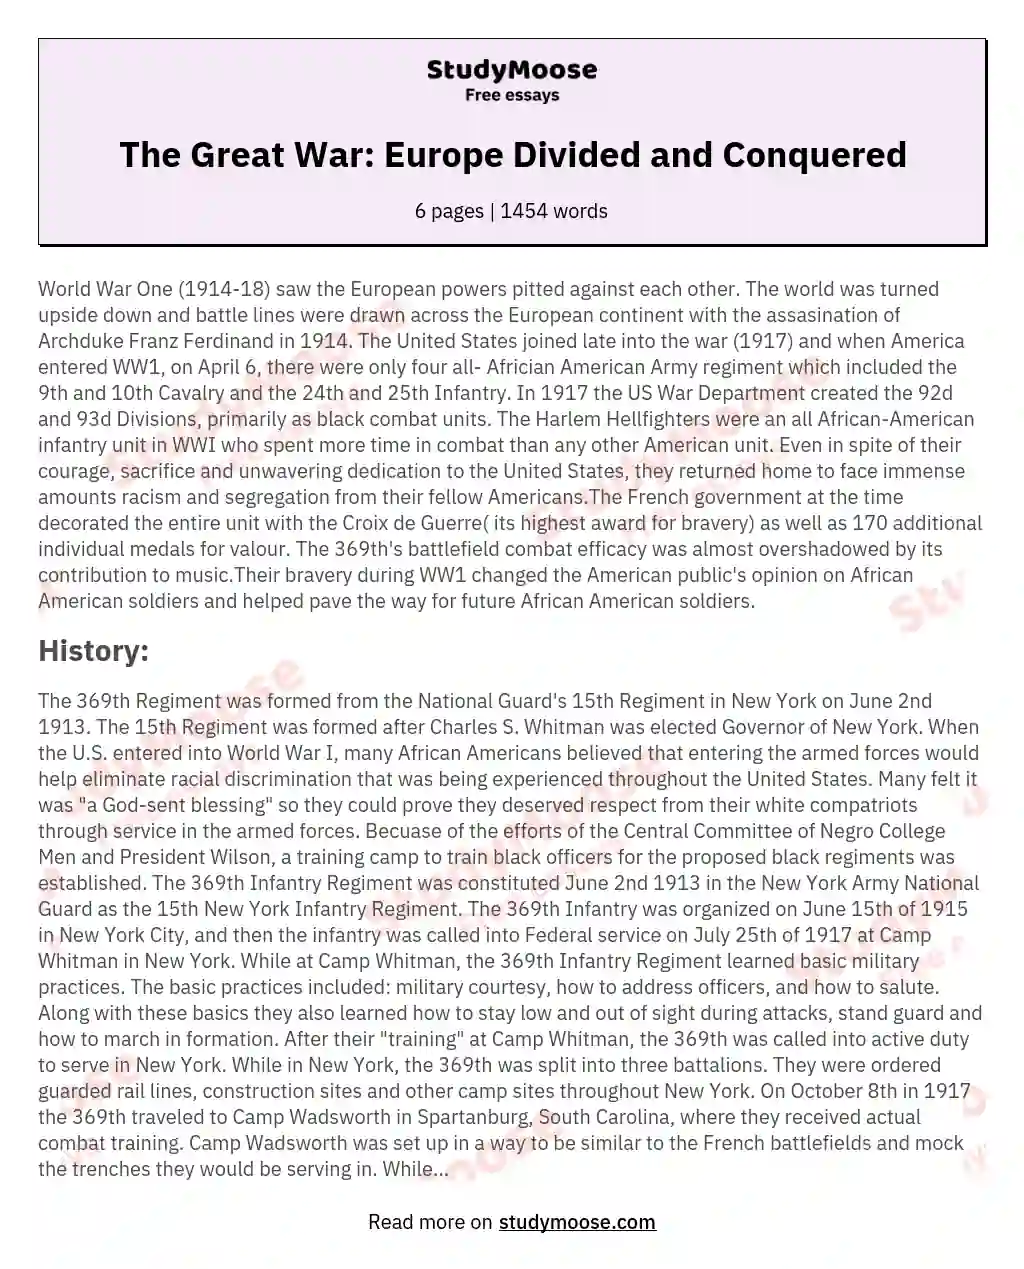 The Great War: Europe Divided and Conquered essay